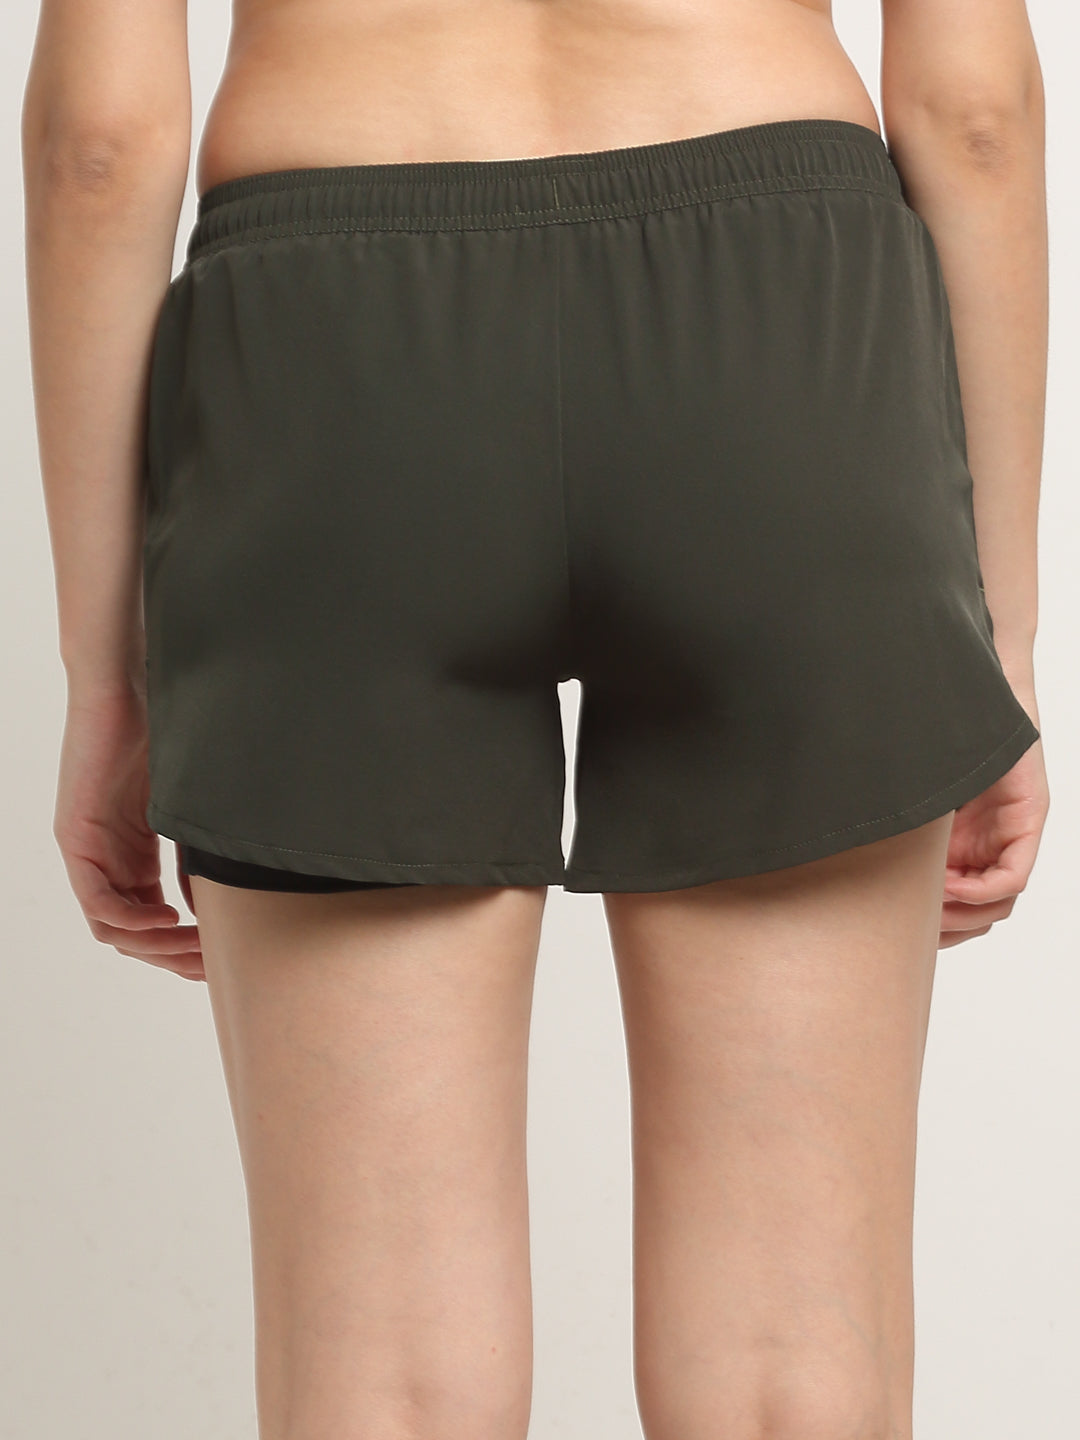 Invincible Women's Double Layered Shorts